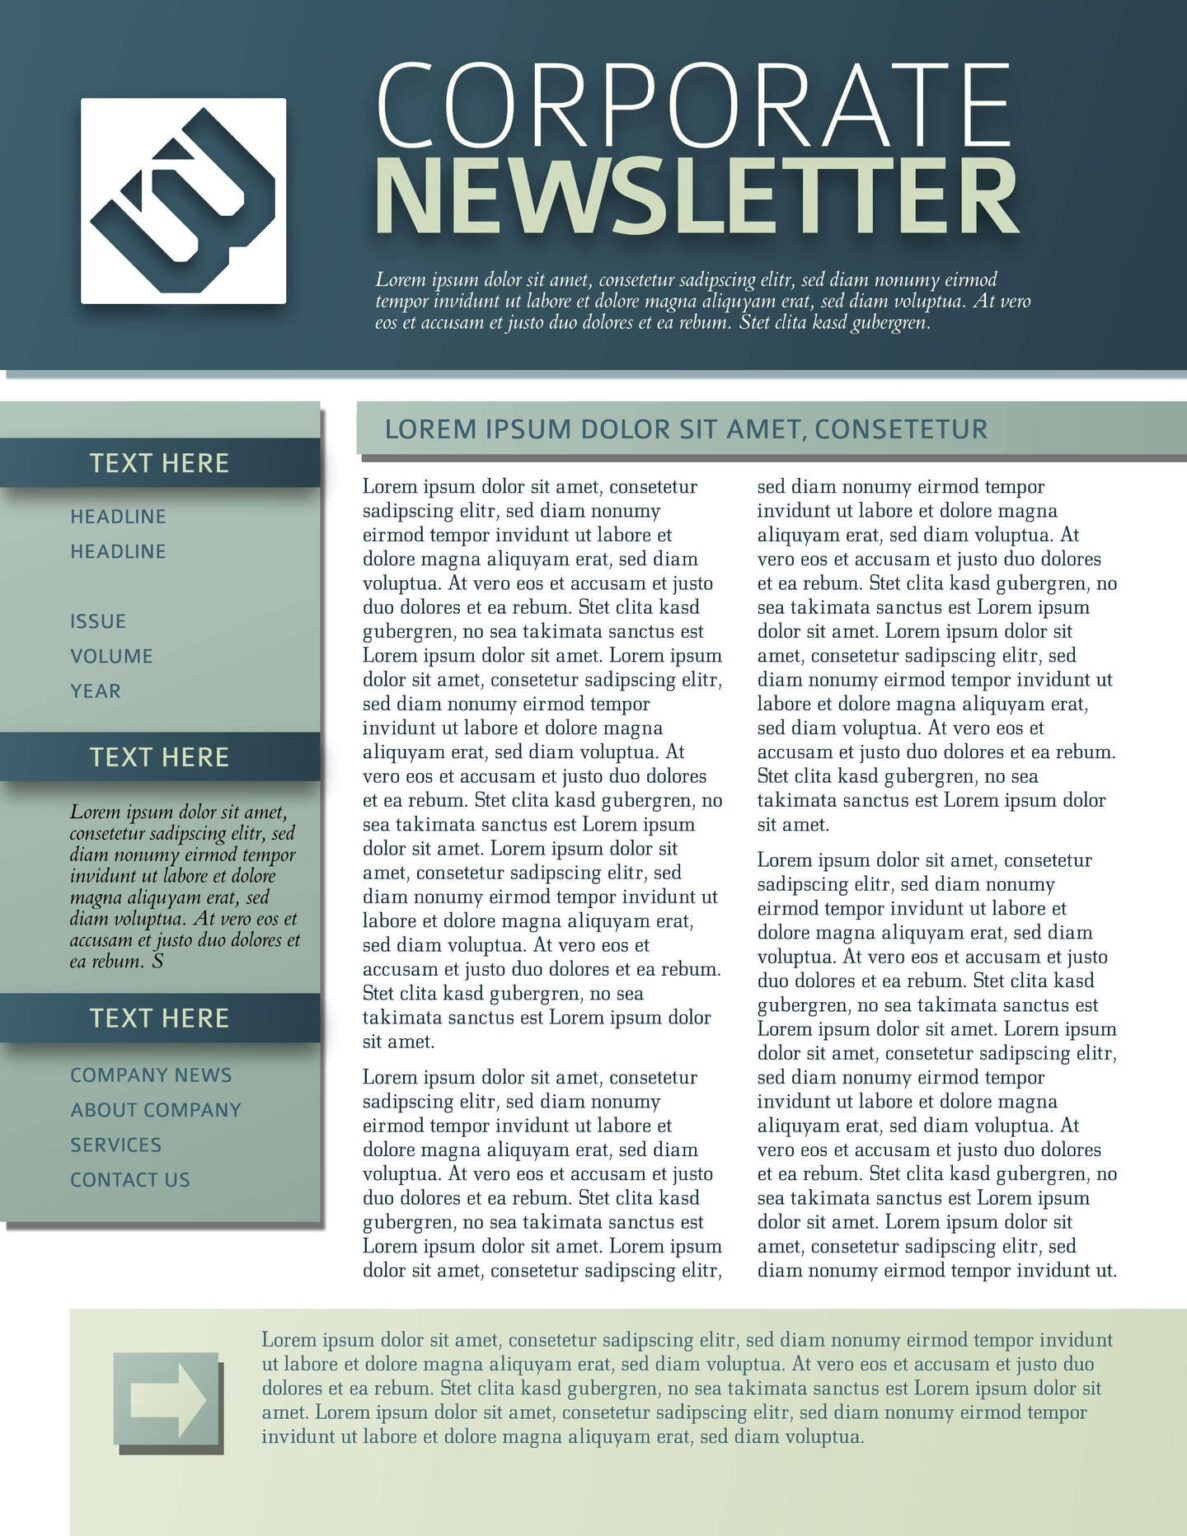 wellness articles for employee newsletters